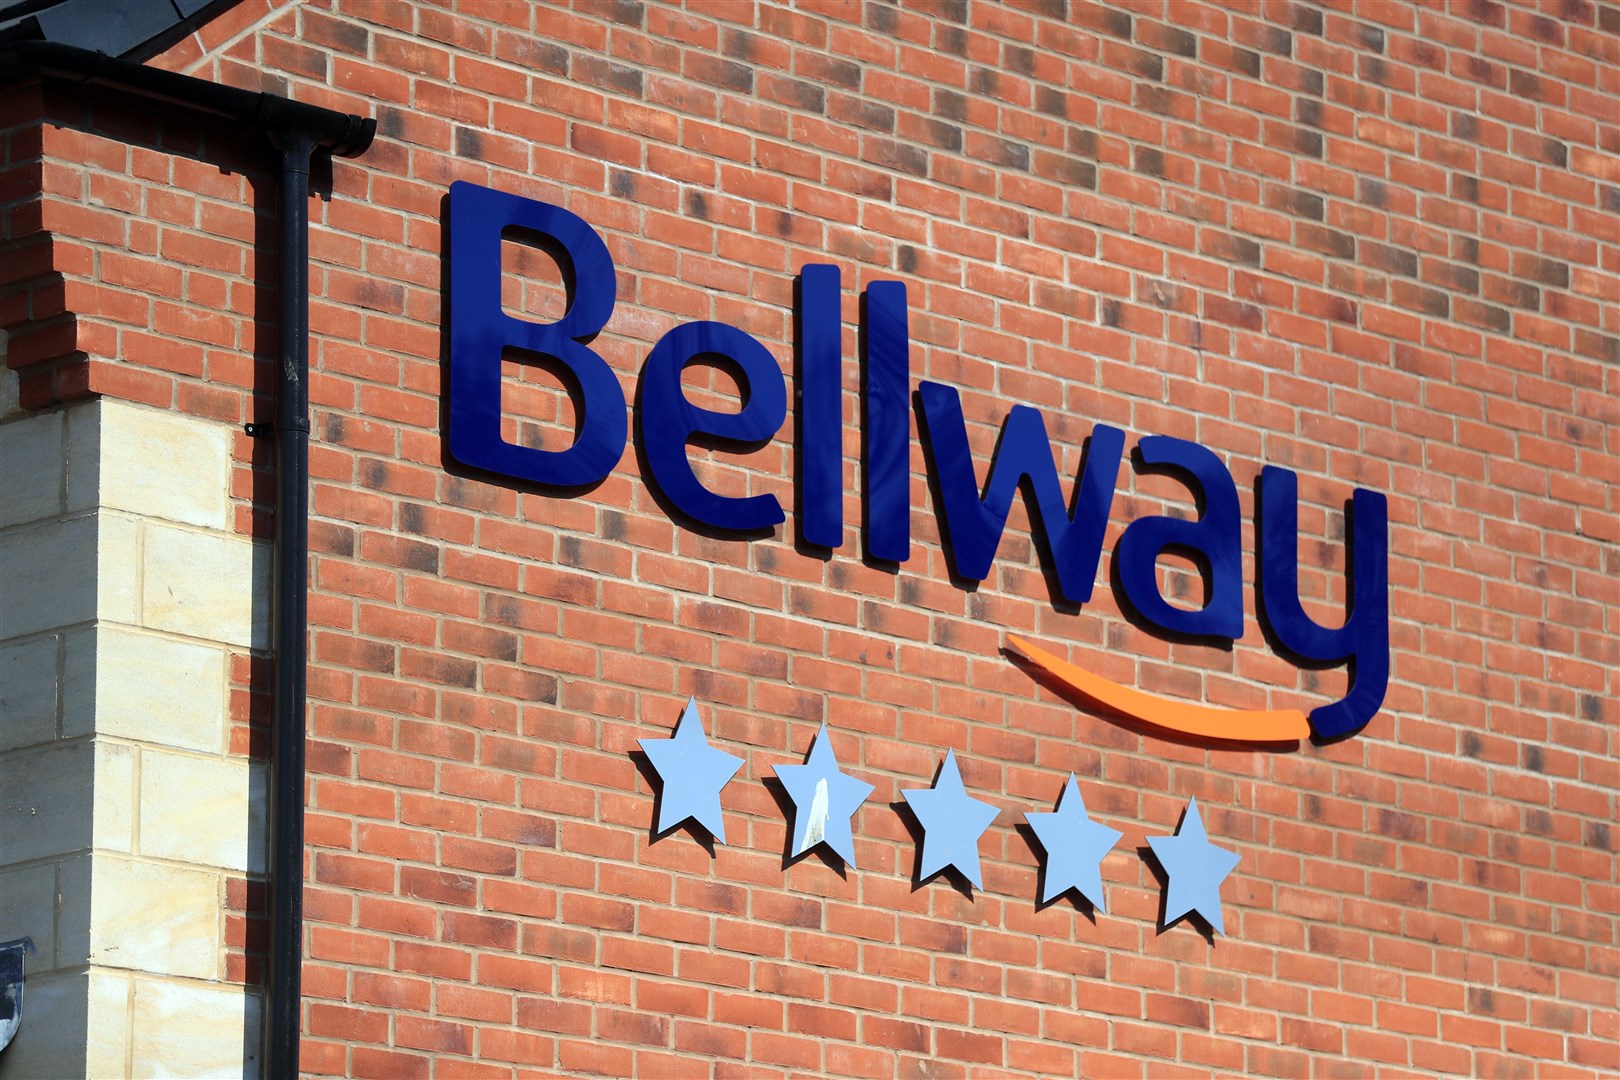 bellway-set-for-lower-volumes-and-selling-prices-amid-interest-rate-hikes